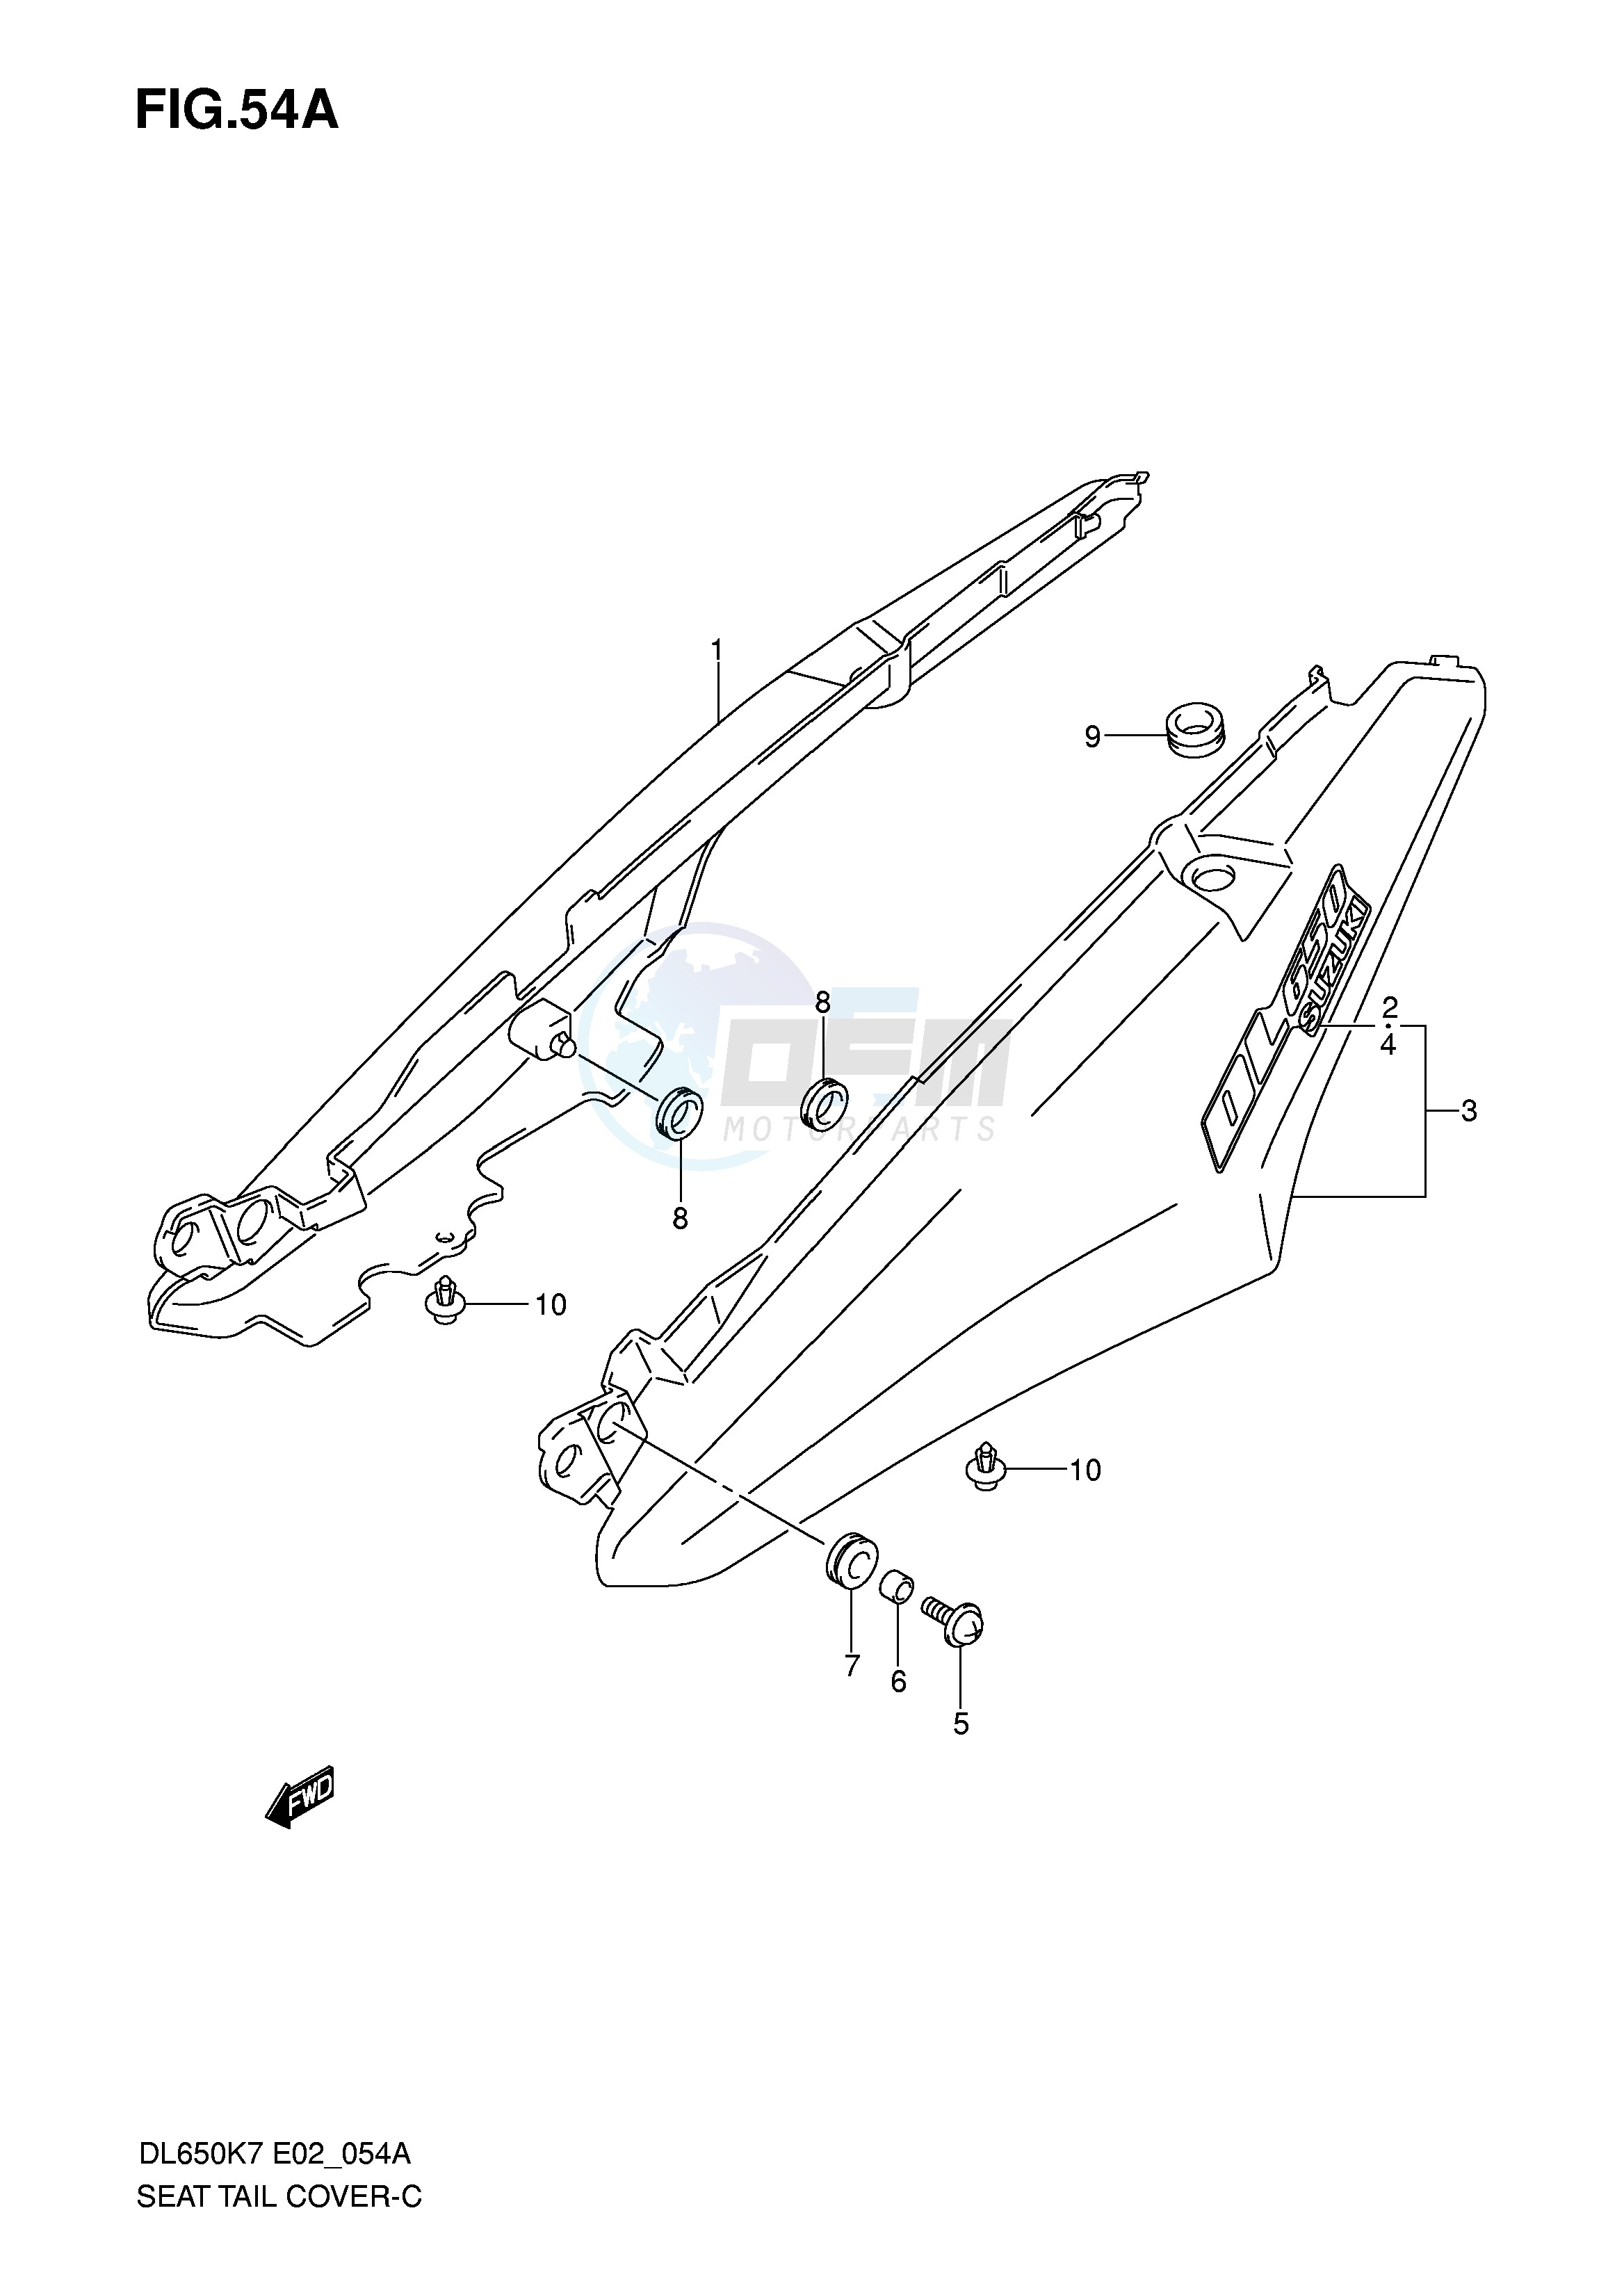 SEAT TAIL COVER (MODEL K8) blueprint